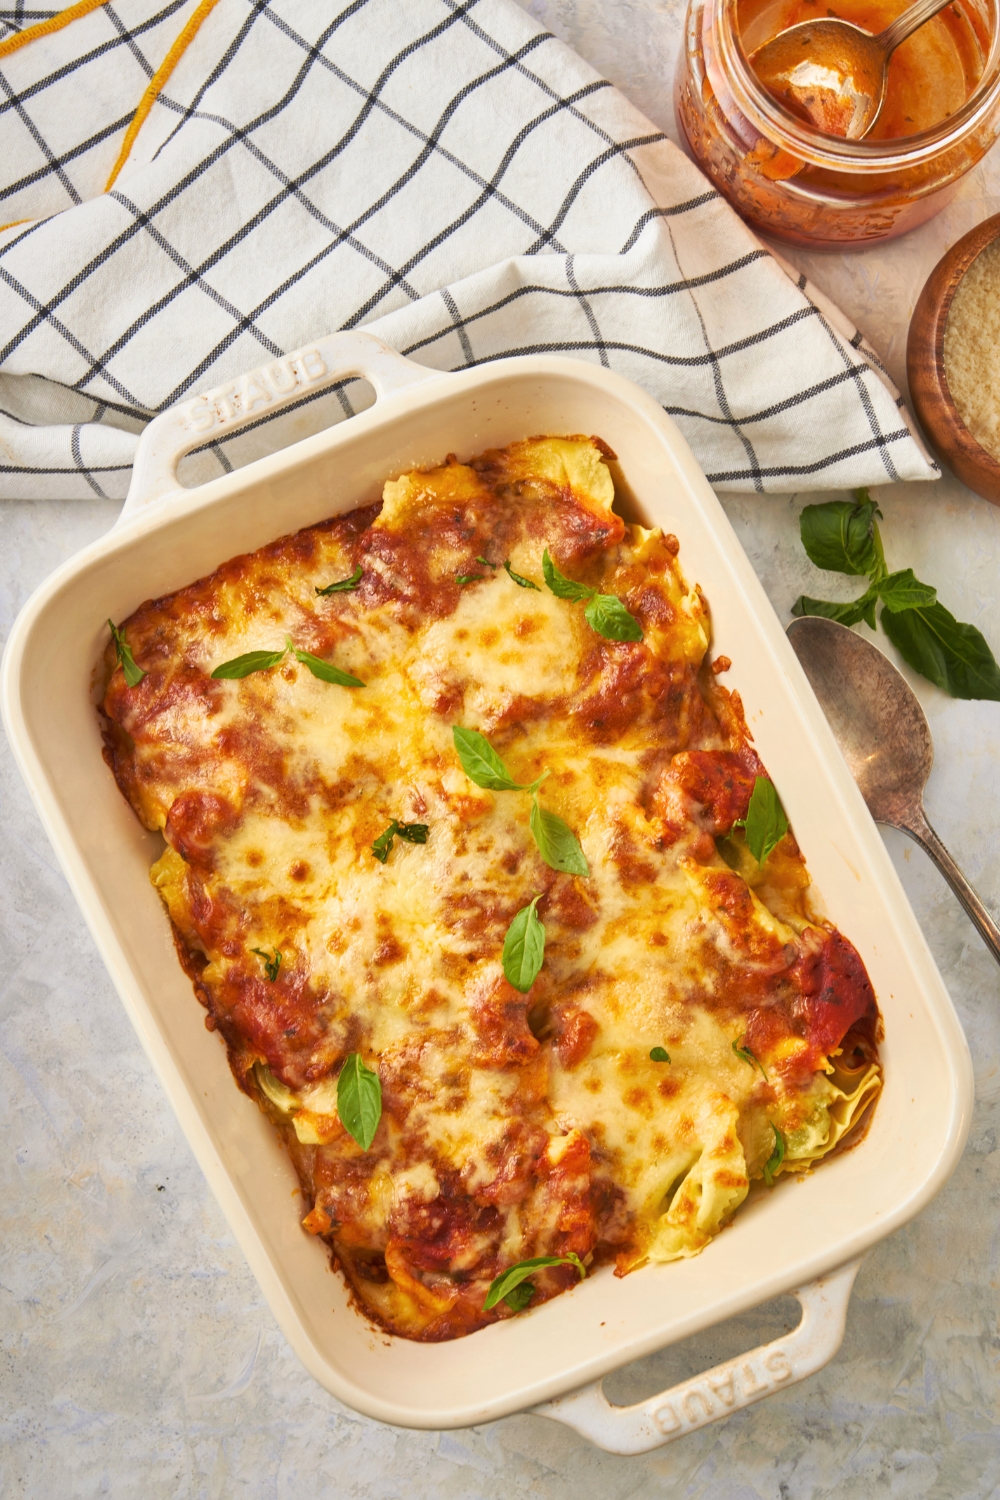 Basil leaves on top of cheesy baked tortellini in a white baking dish on top of a white counter.